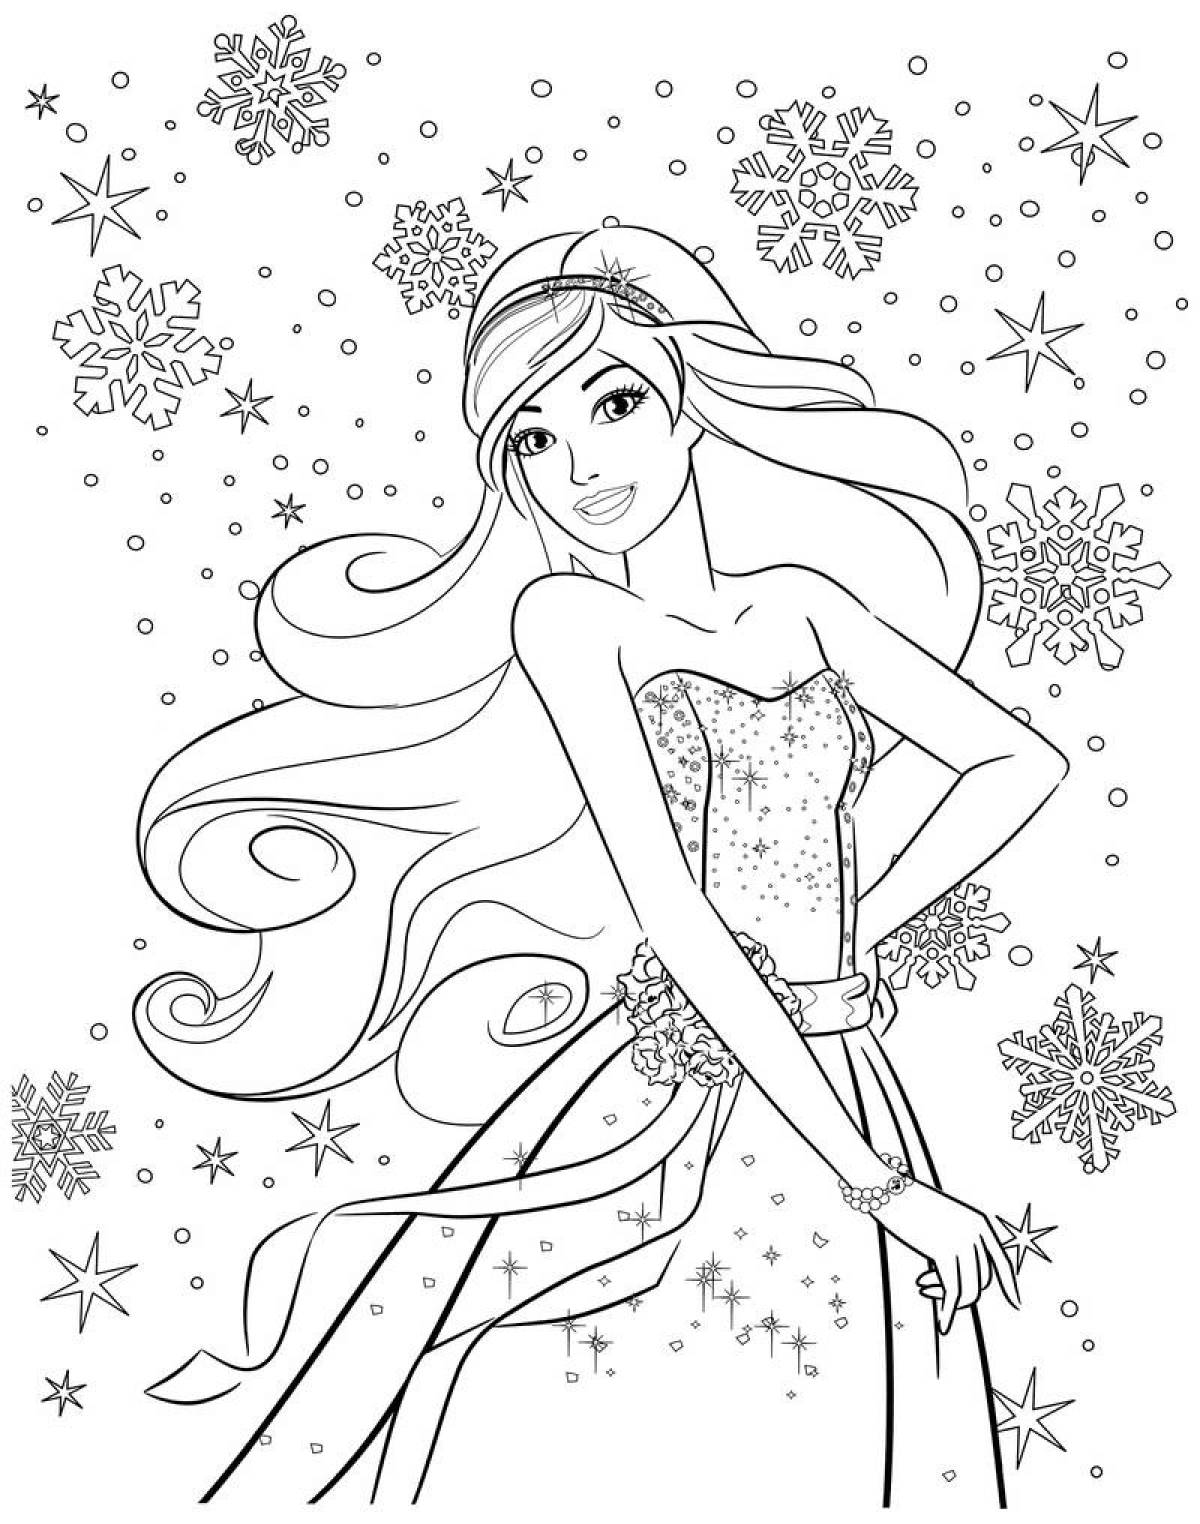 Coloring page new 2020: gorgeous and amazing